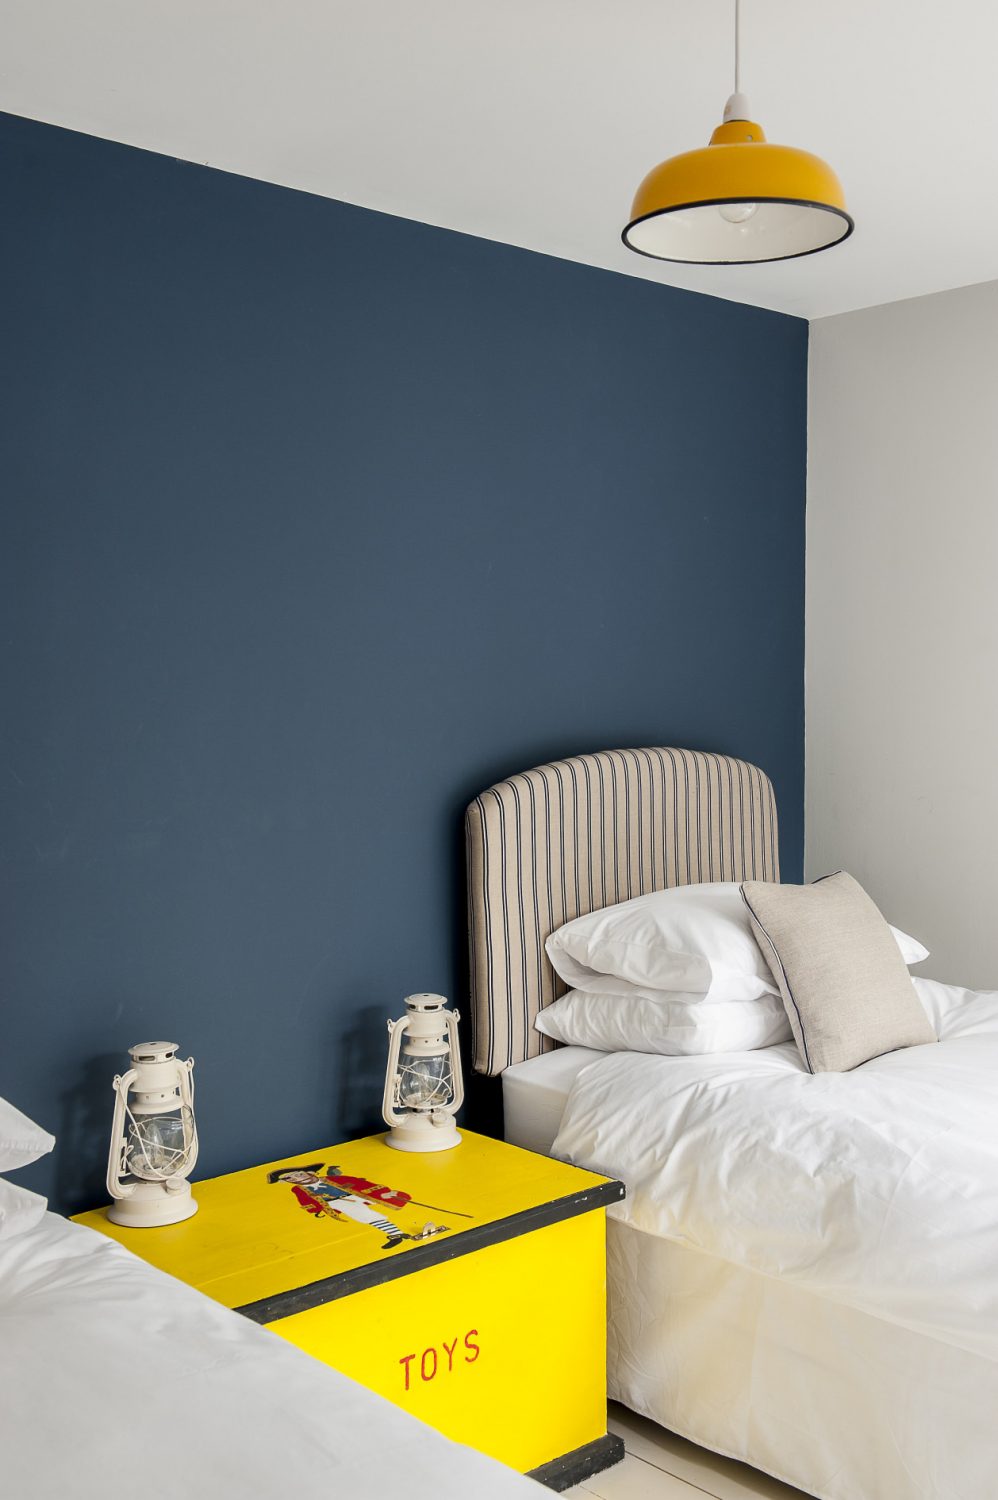 The headboards are Rowan Plowden. Francesca bought the old painted toy box serving as a joint bedside table from a stall in Lydd. The ceiling lampshade is from Hunter Jones. The wall behind the beds is painted in Stiffkey Blue by Farrow & Ball. The hurricane lamps on the chest are from Dunelm